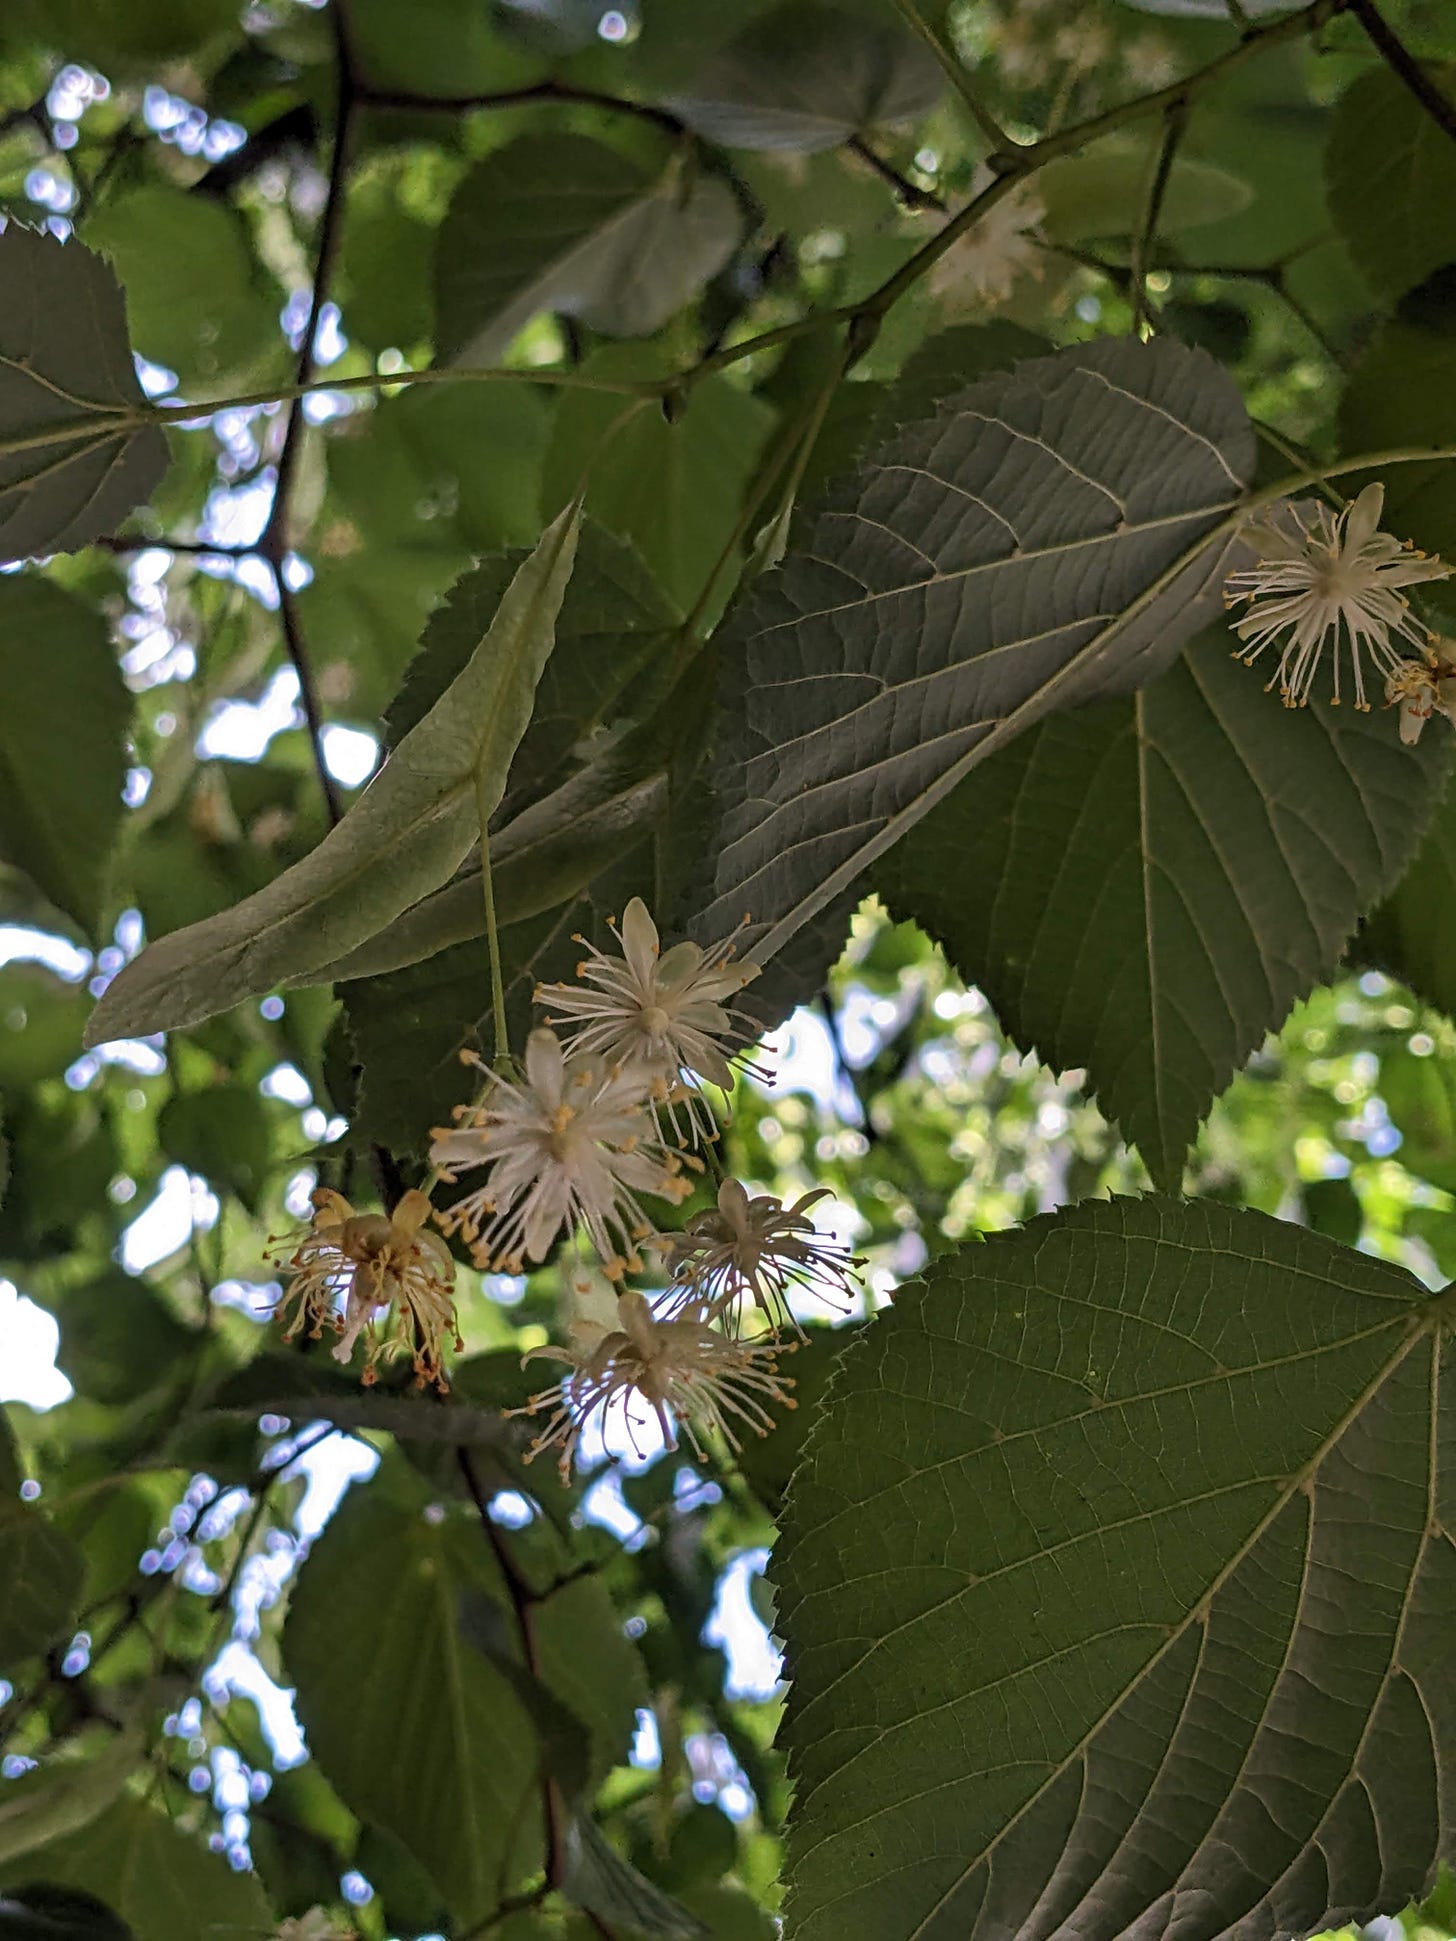 starlike linden blossoms under the darker green canopy of their leaves